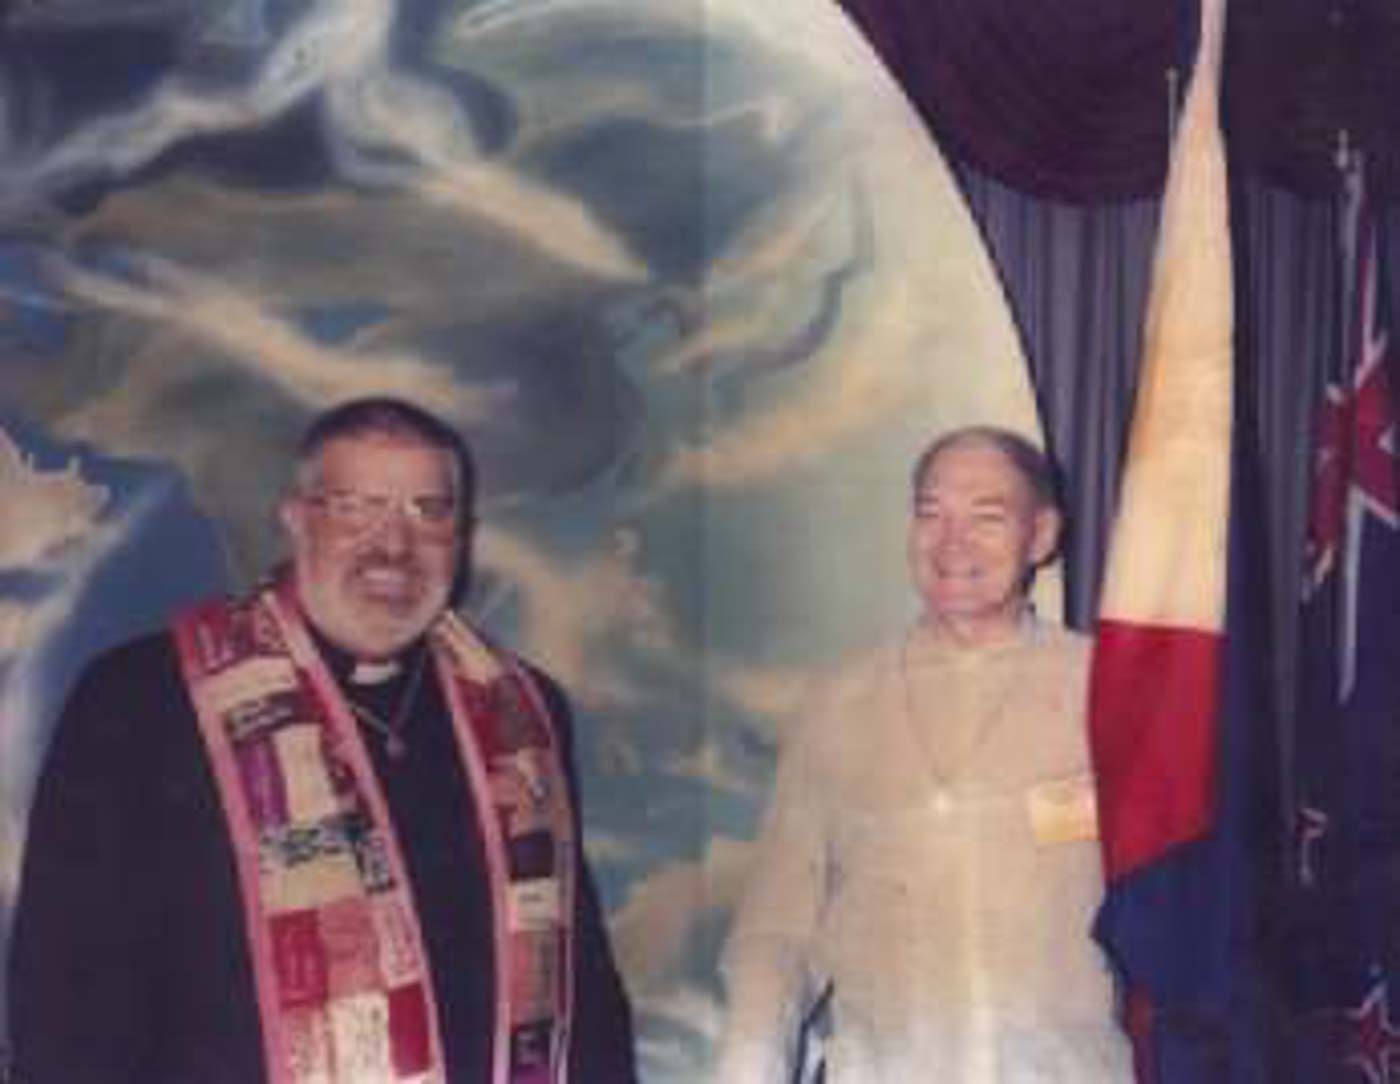 FOUNDING OF MCC MANILA. Father Richard Mickley (right) holding the flag of the Philippines with Reverend Troy Perry, founder of MCC worldwide. Photo courtesy of Father Richard Mickley   